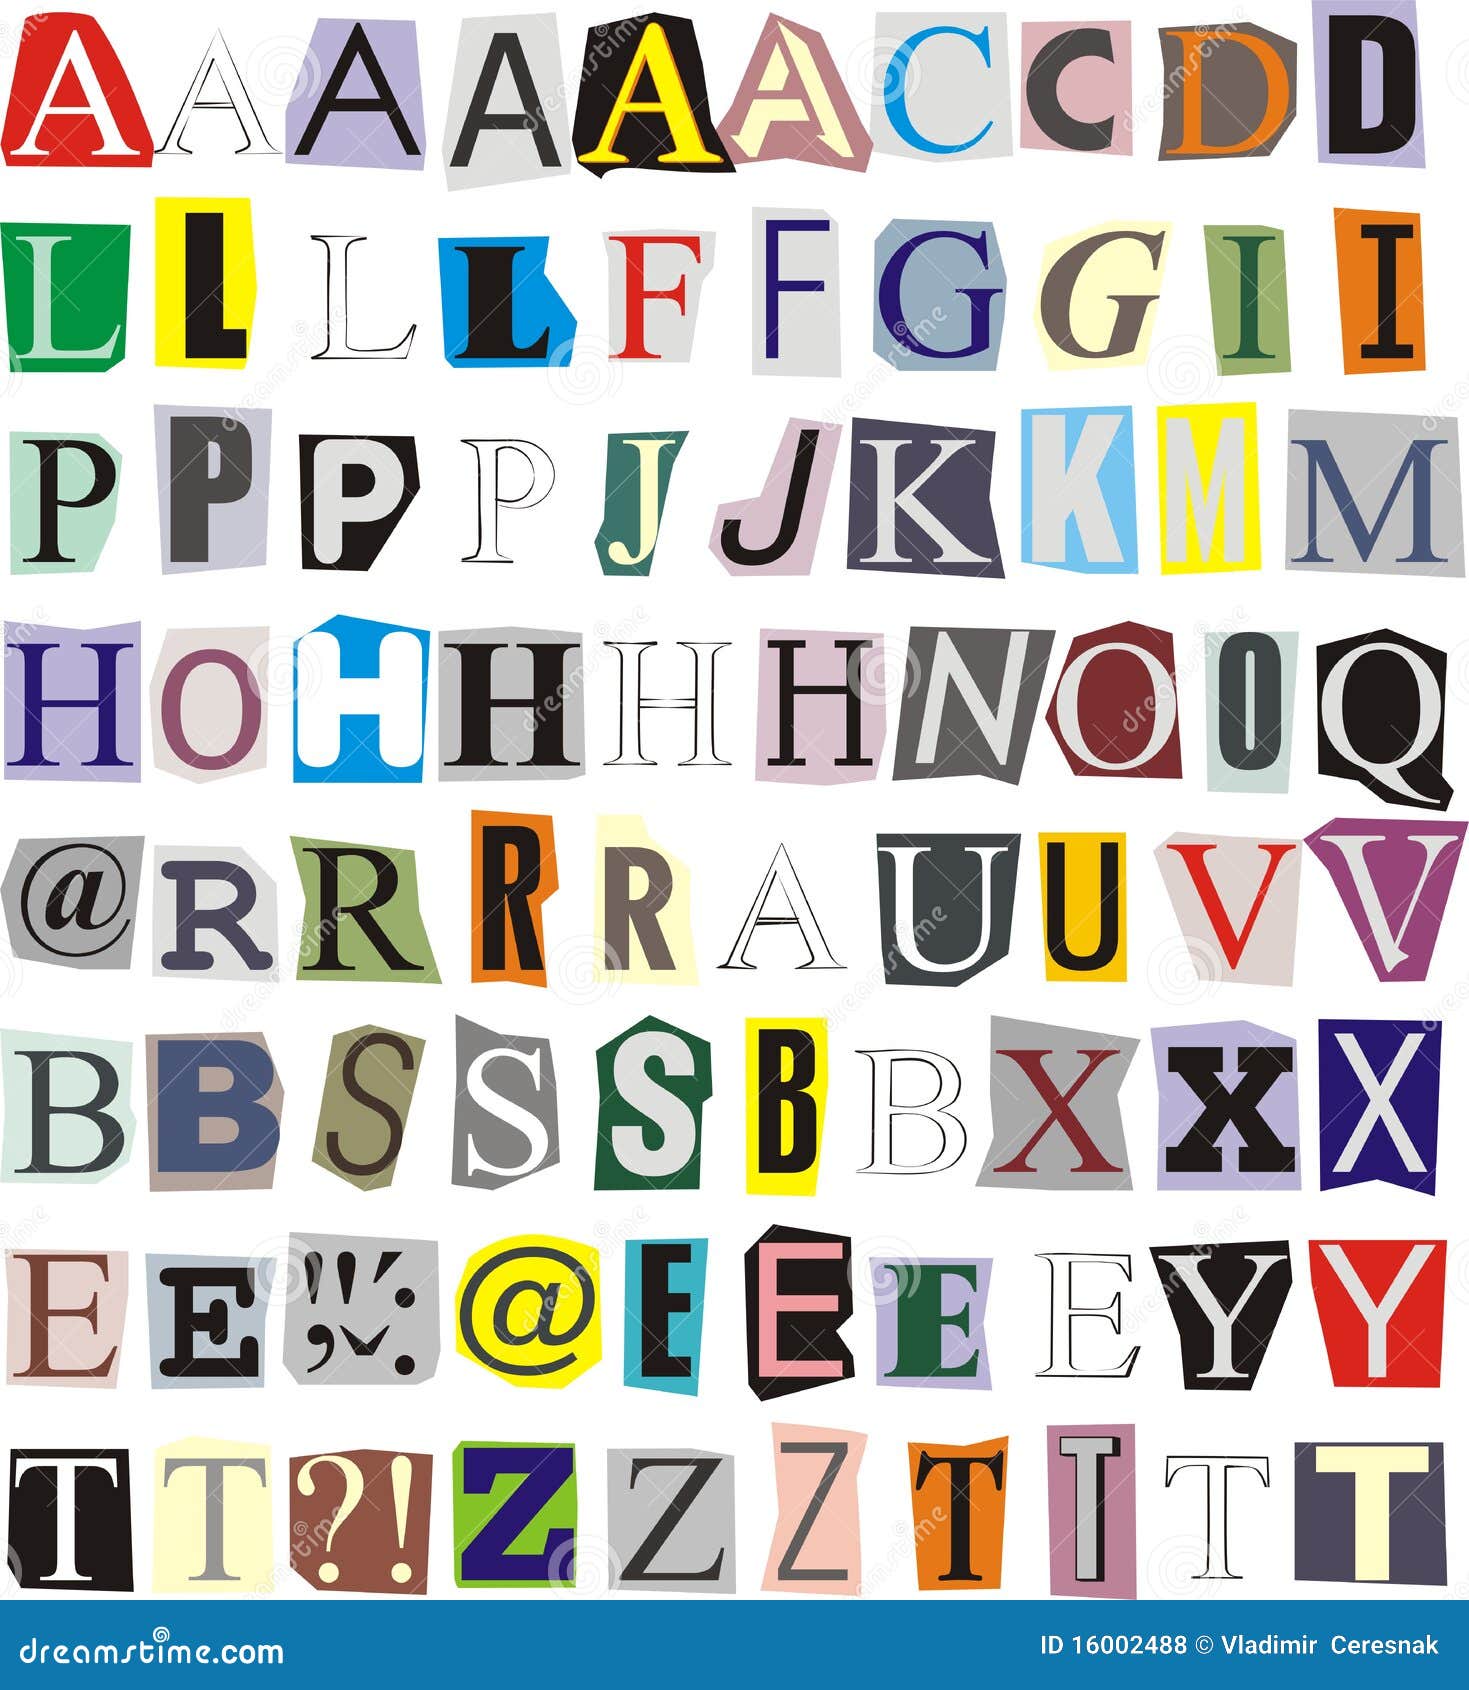 Alphabet Cut Out Of Paper Royalty Free Stock Photos Image 16002488